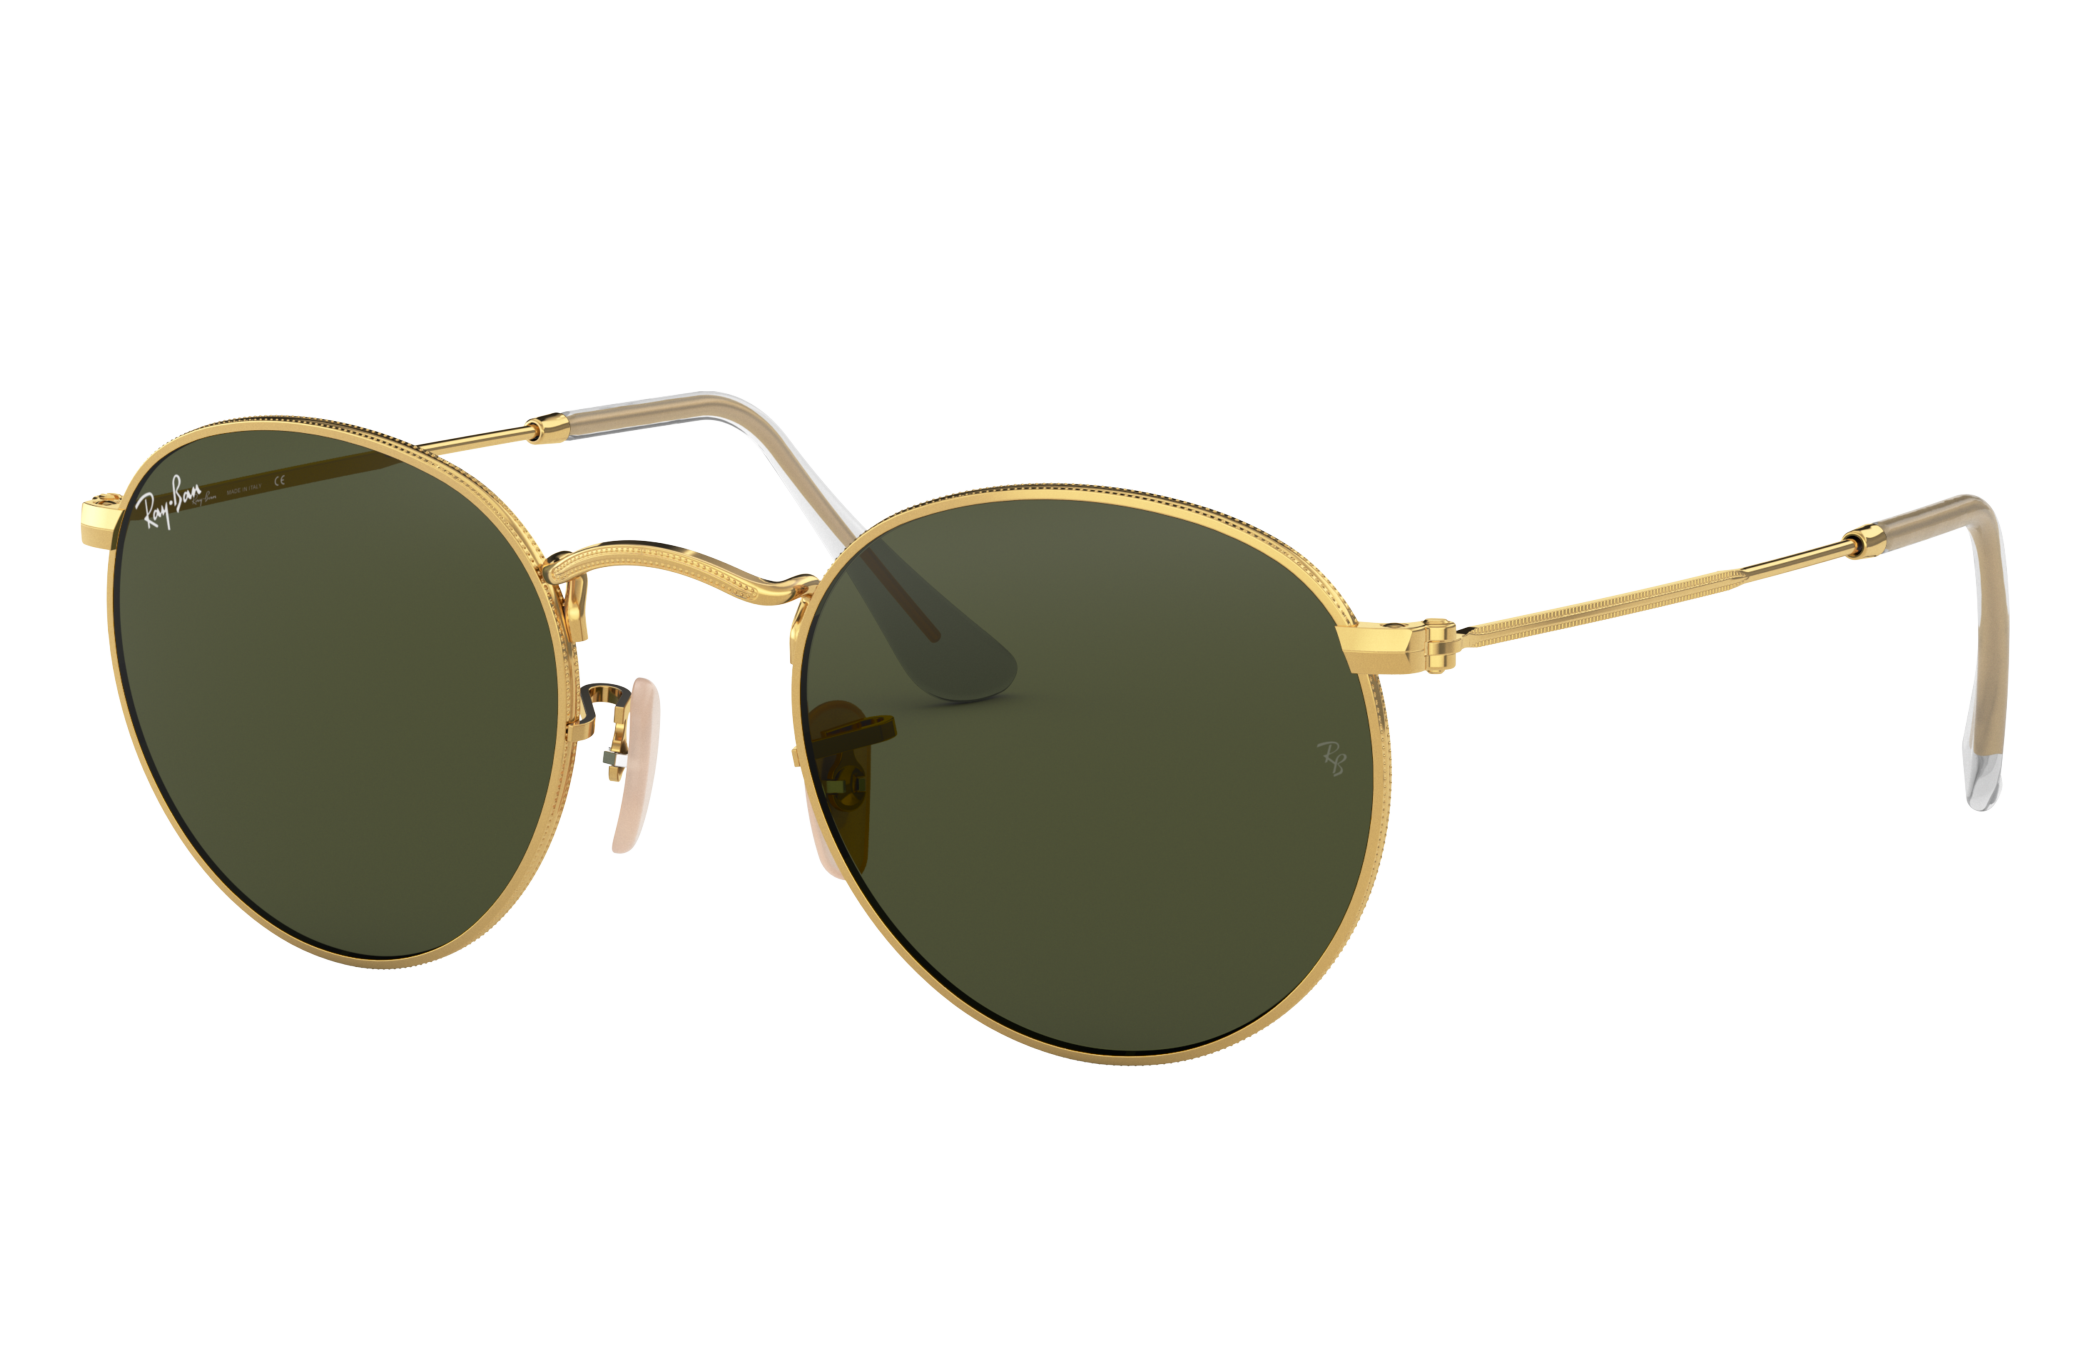 Ray Ban Ronde zonnebril goud-groen casual uitstraling Accessoires Zonnebrillen Ronde zonnebrillen 